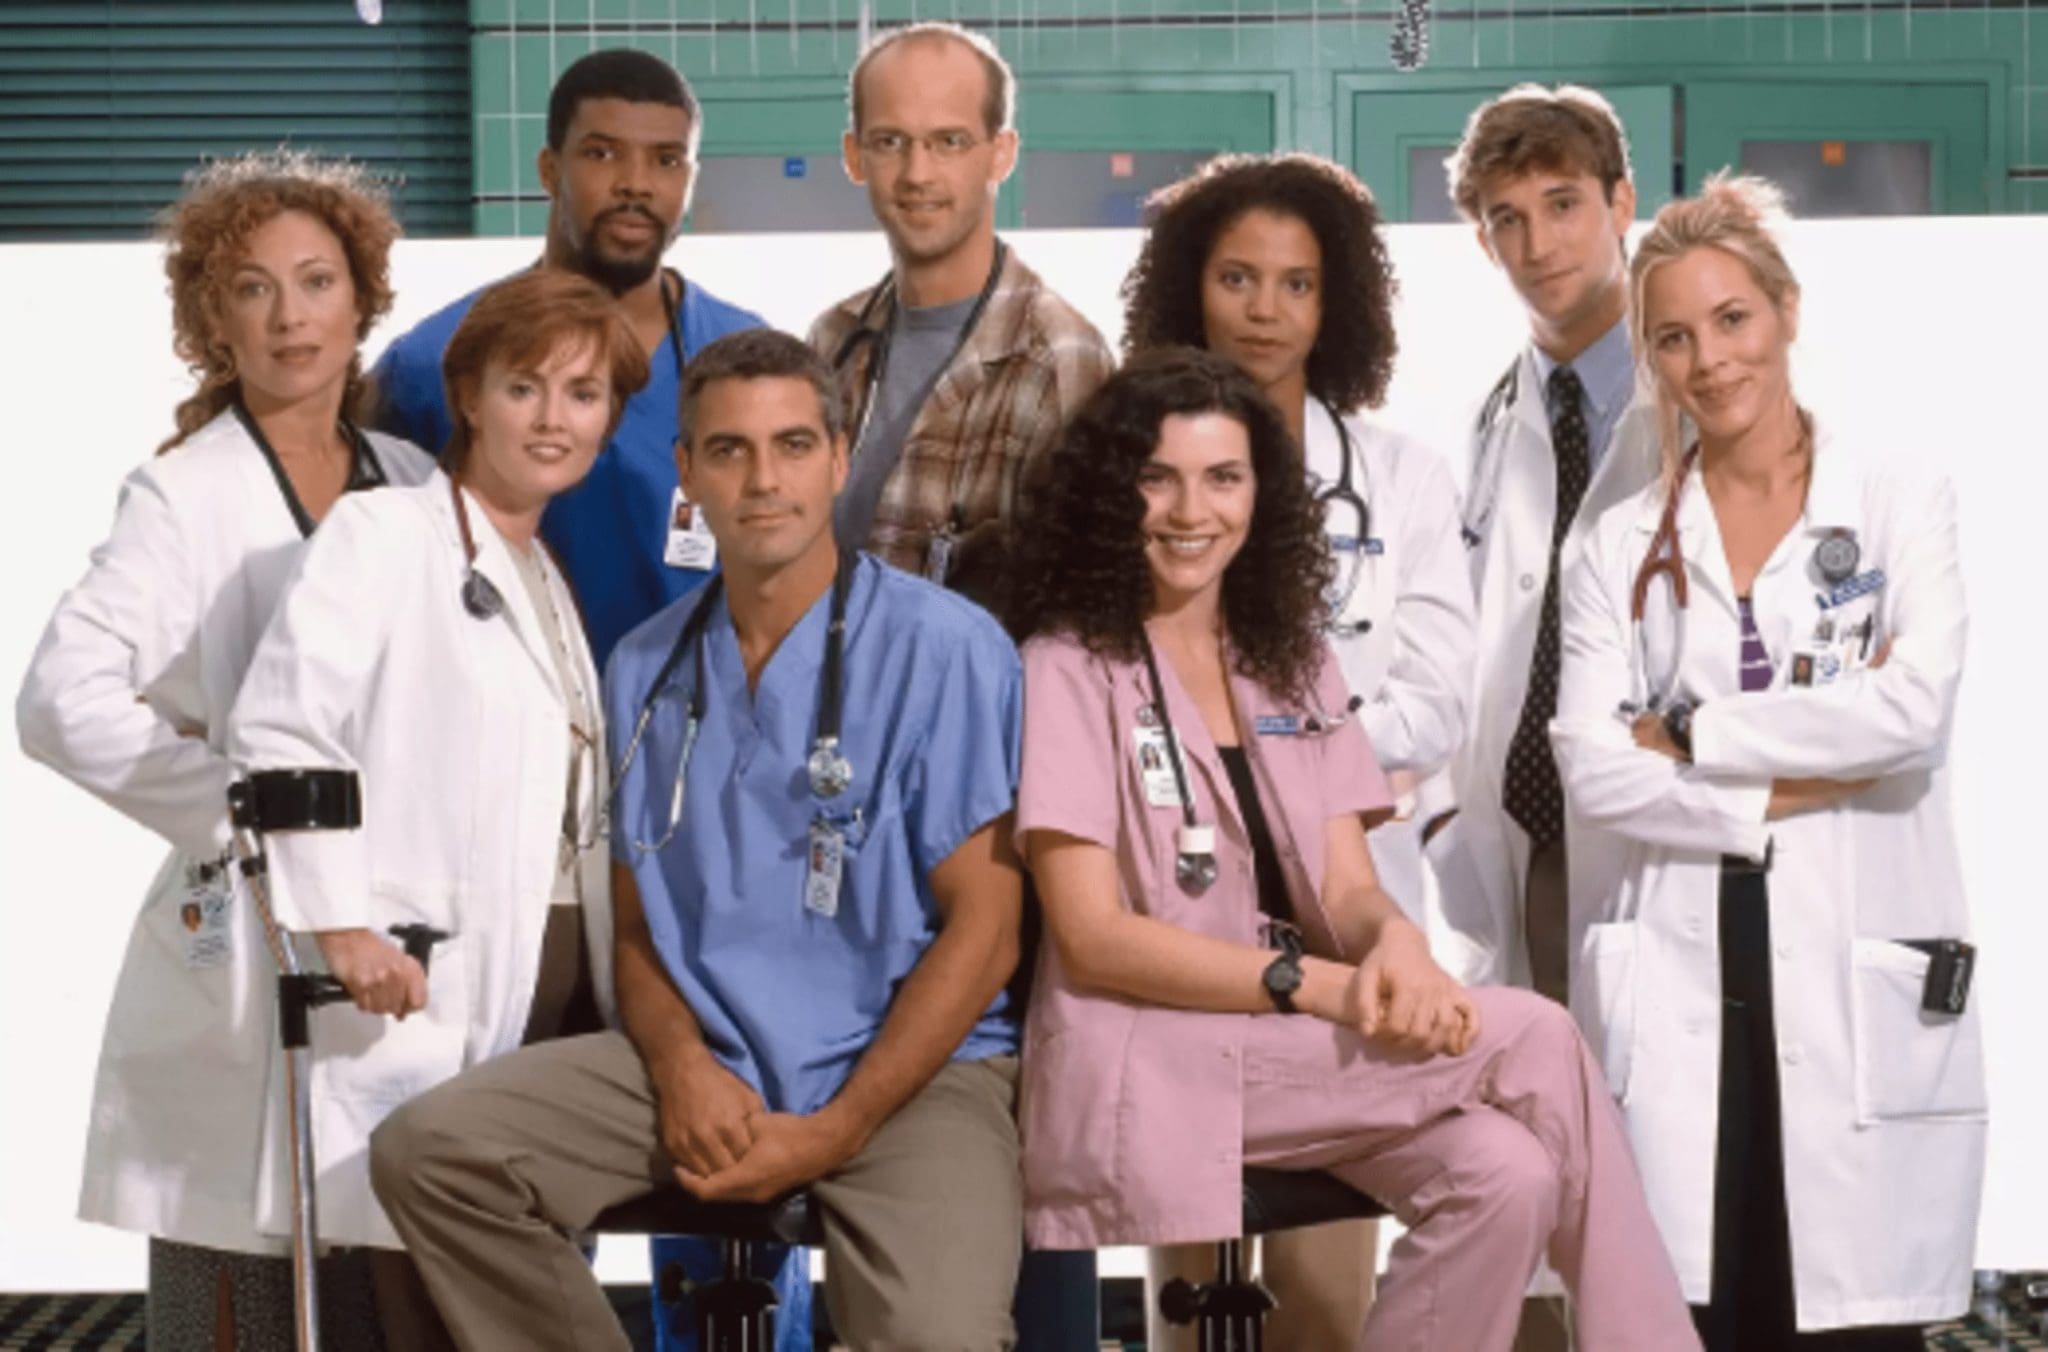 George Clooney has stated that he maintains close relationships with his fellow ER cast members.